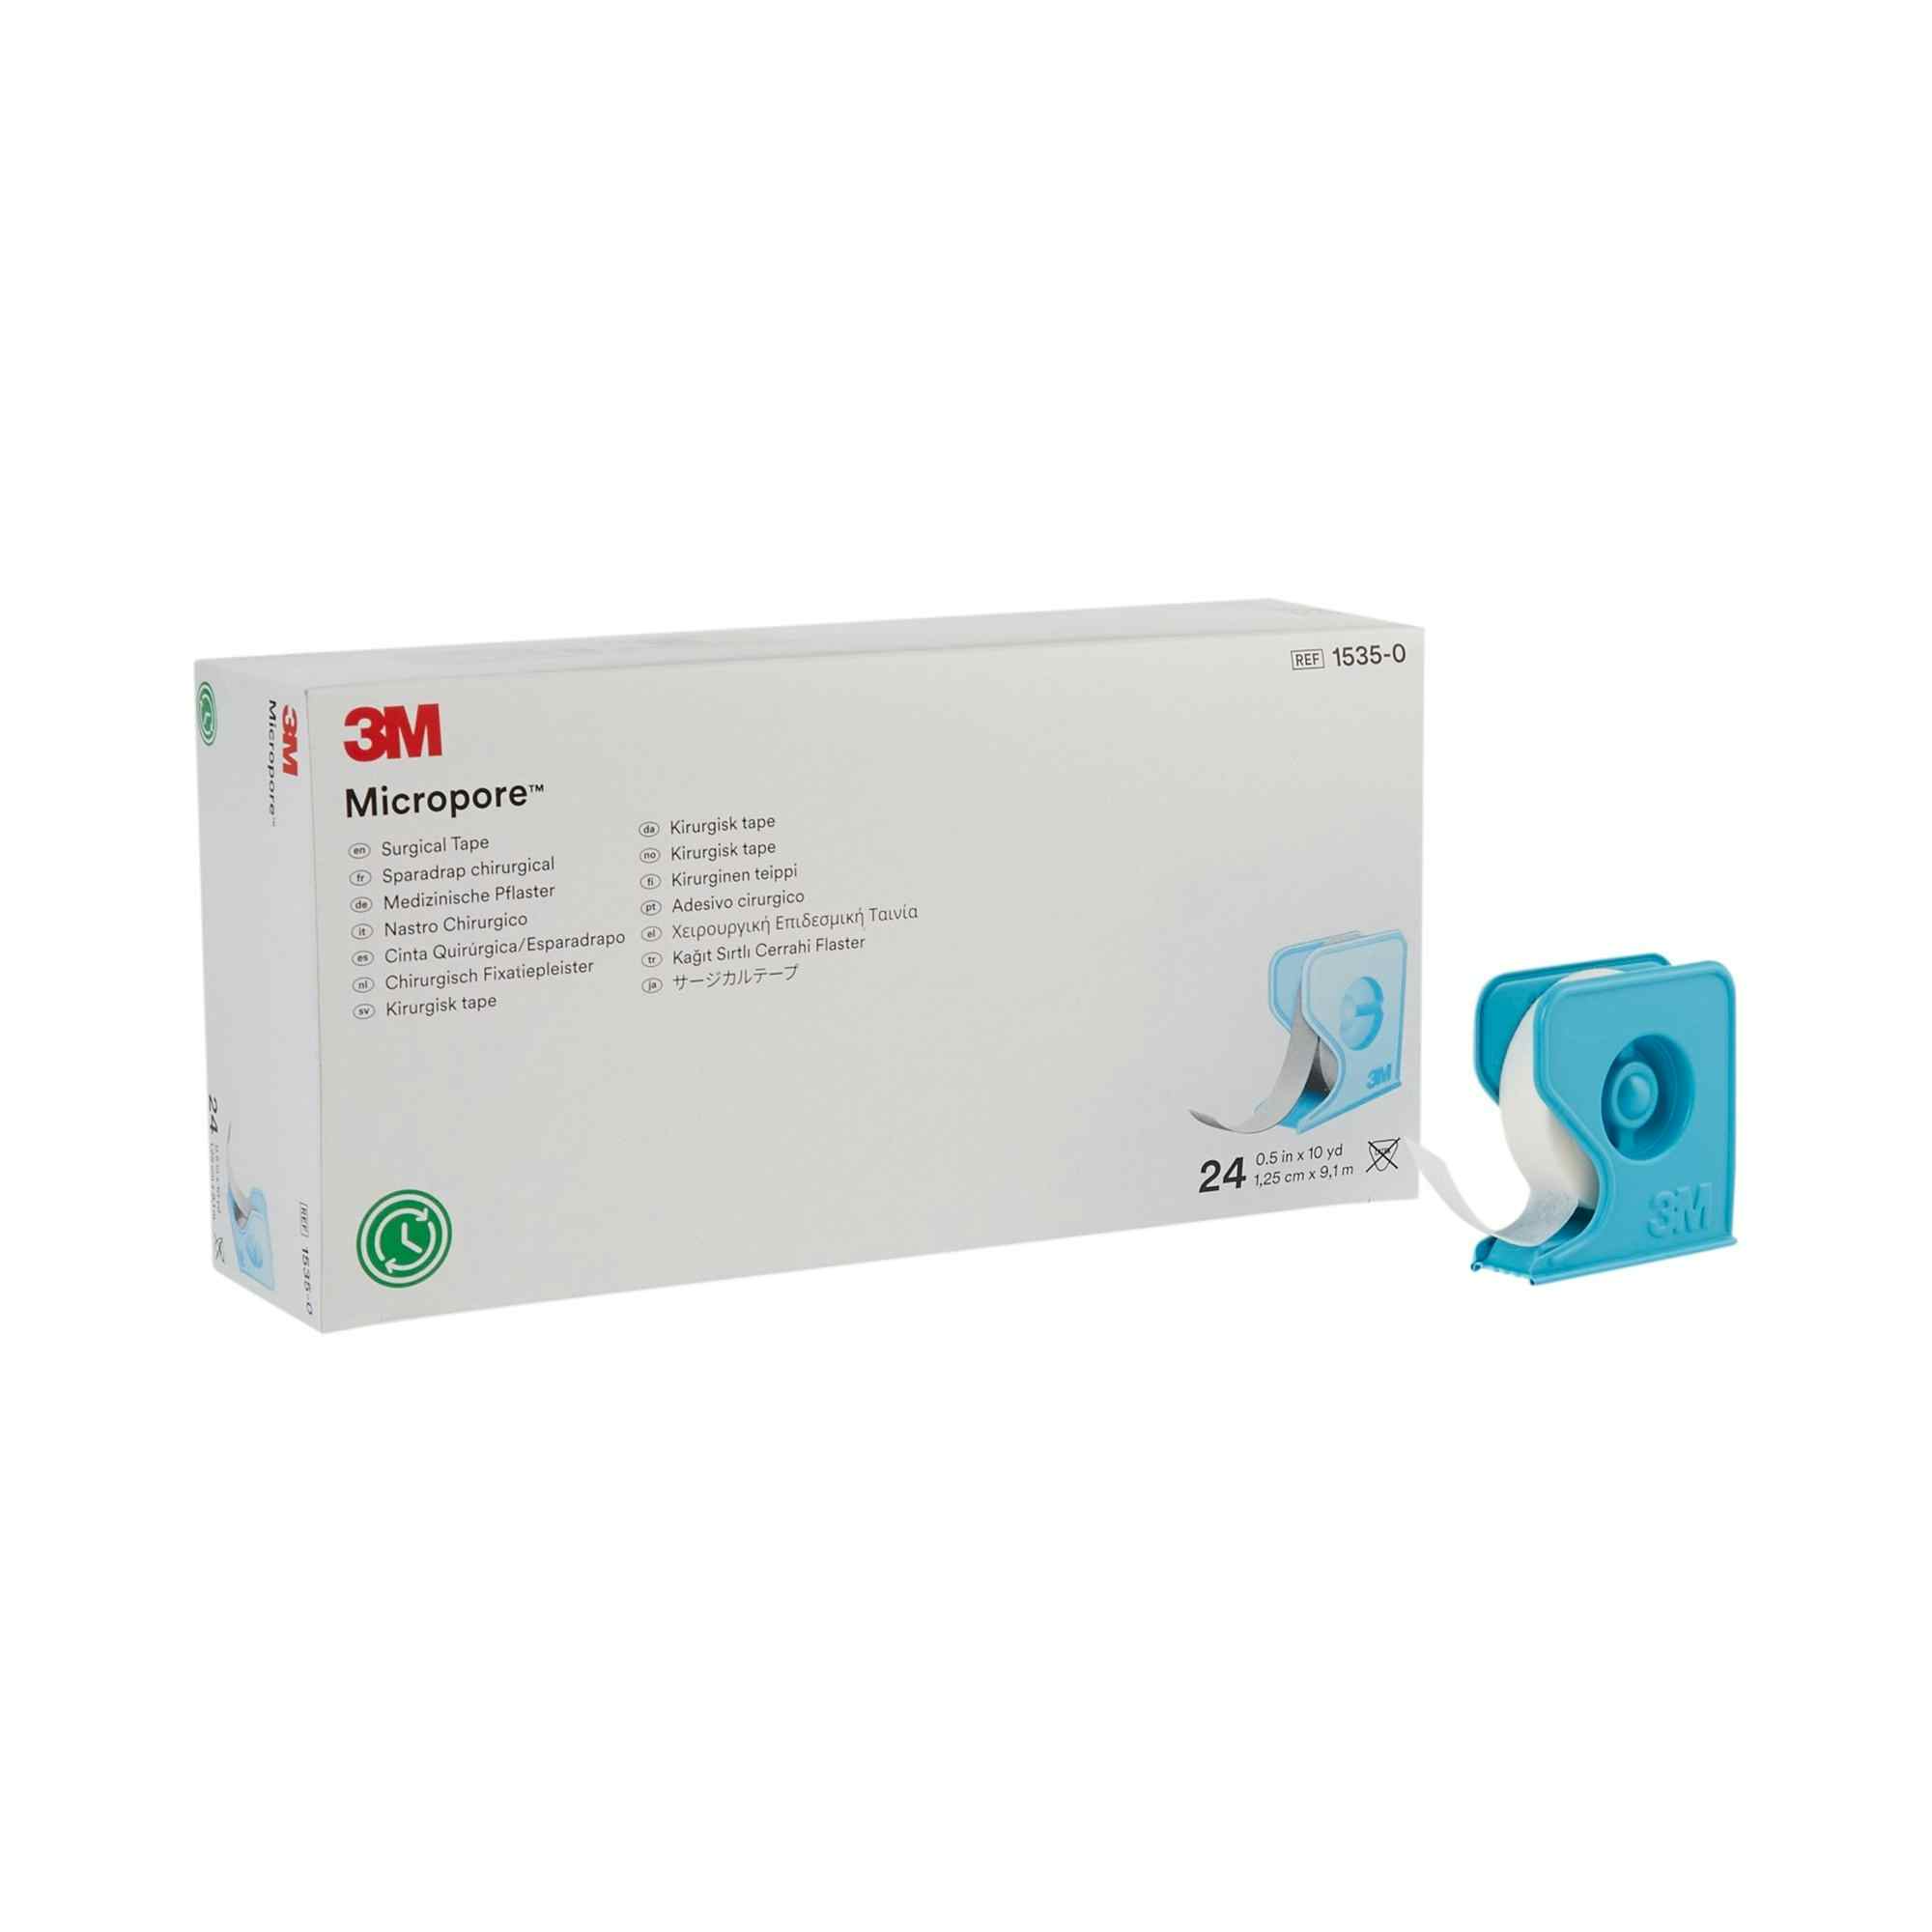 3M Micropore Surgical Tape with Dispenser, Paper, 0.5" X 10 yd, 1535-0, Case of 240 (10 Boxes)